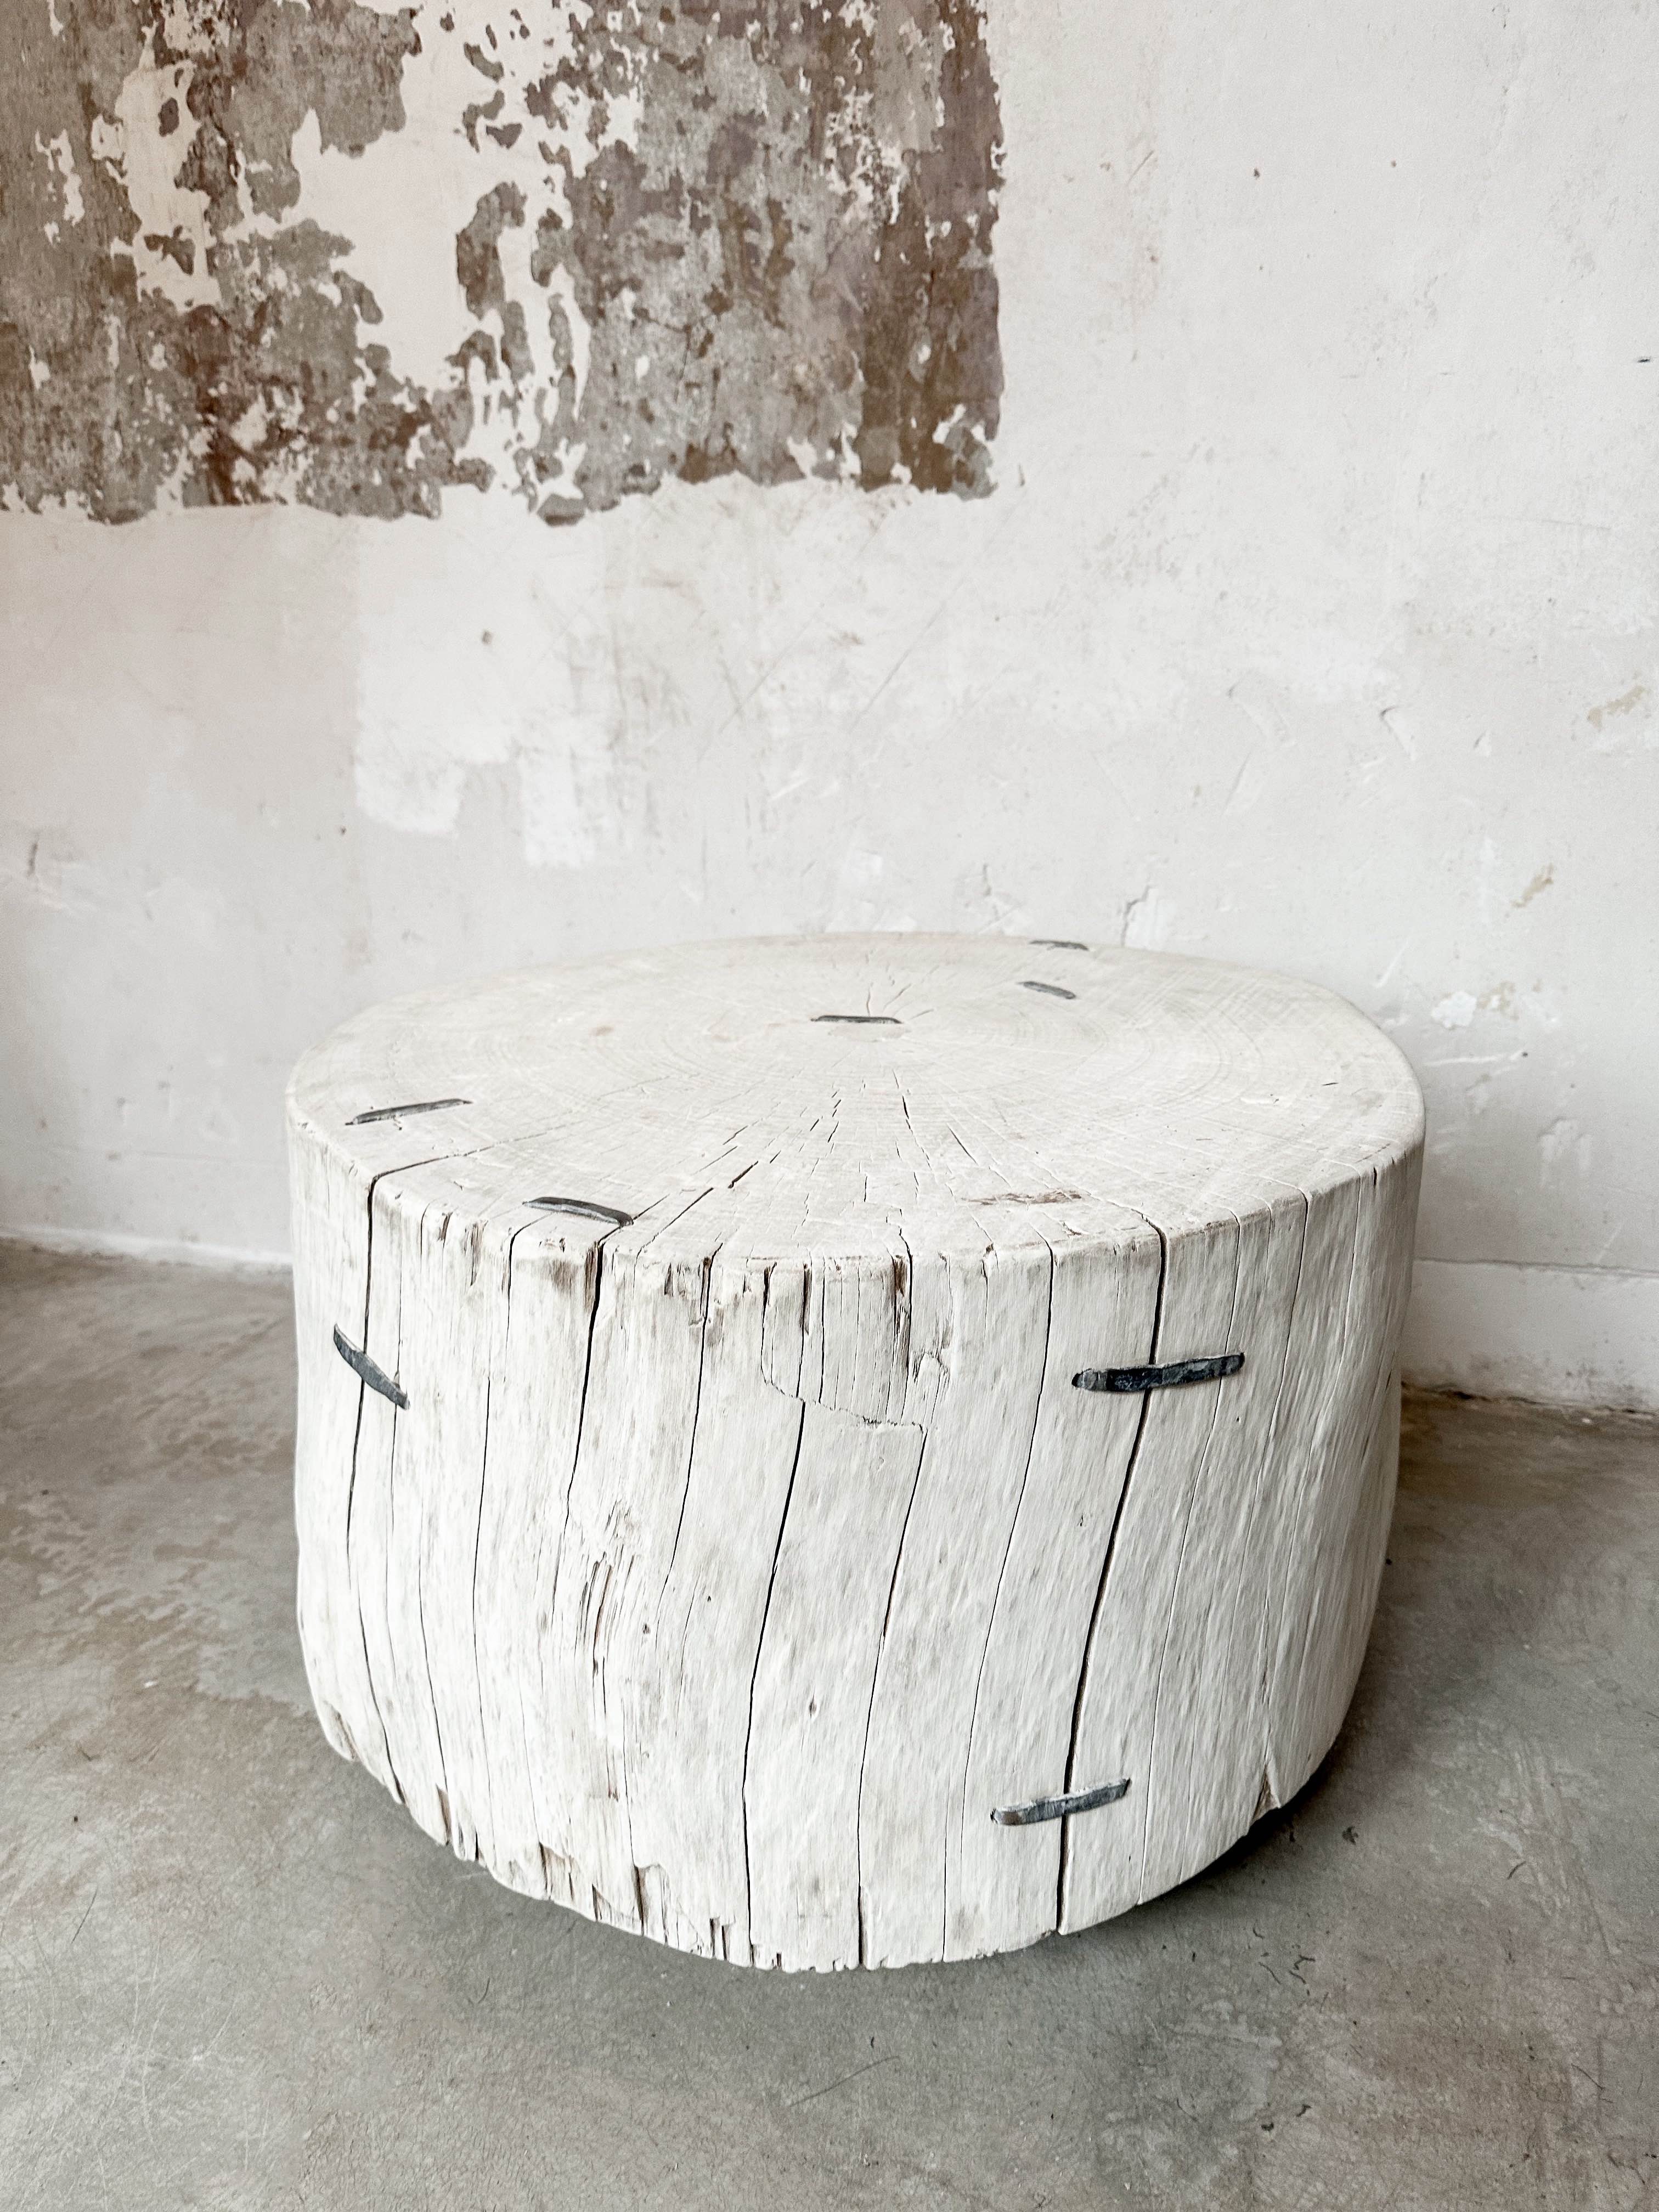 The coffee table "butcher's block round"